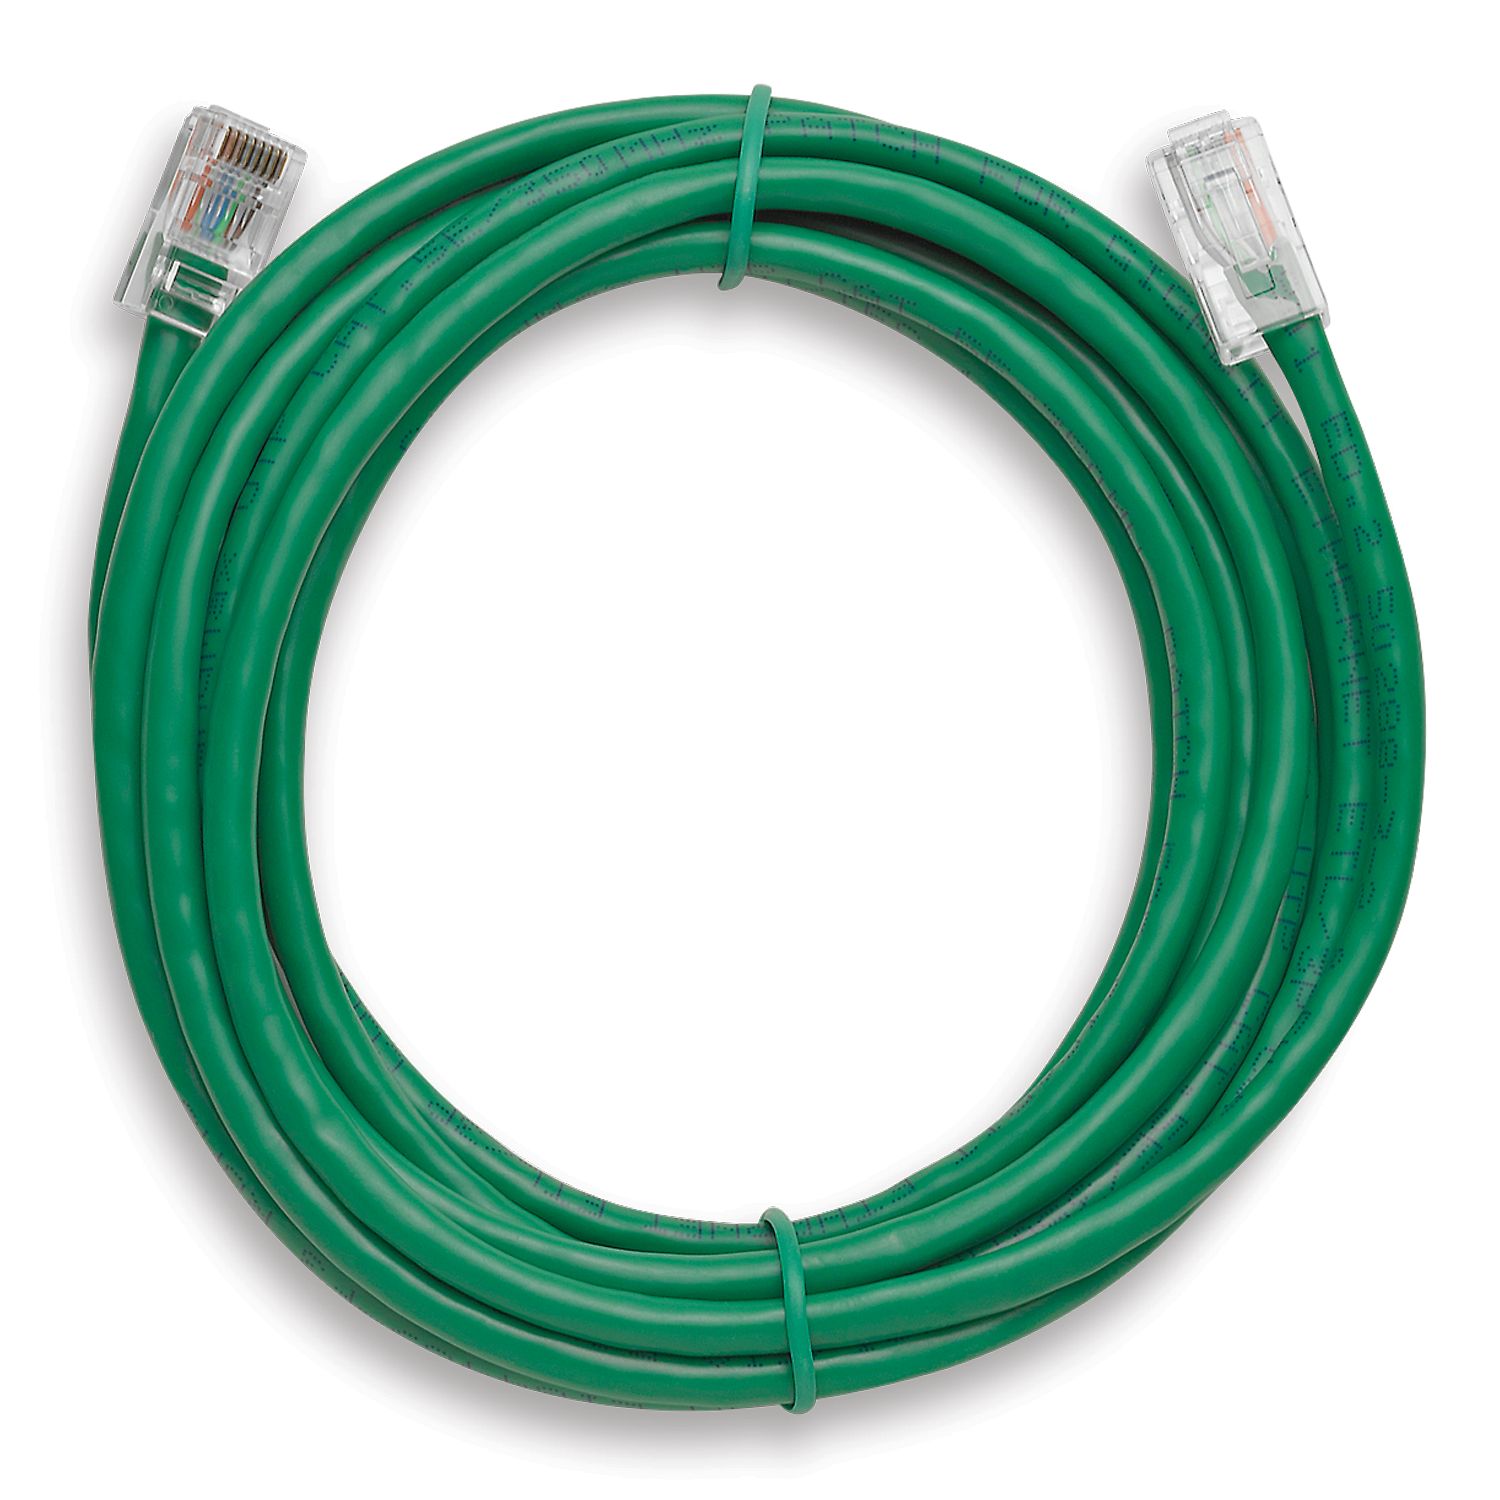 CAT5 GREEN CABLE 25 FEET PLENUM RATED